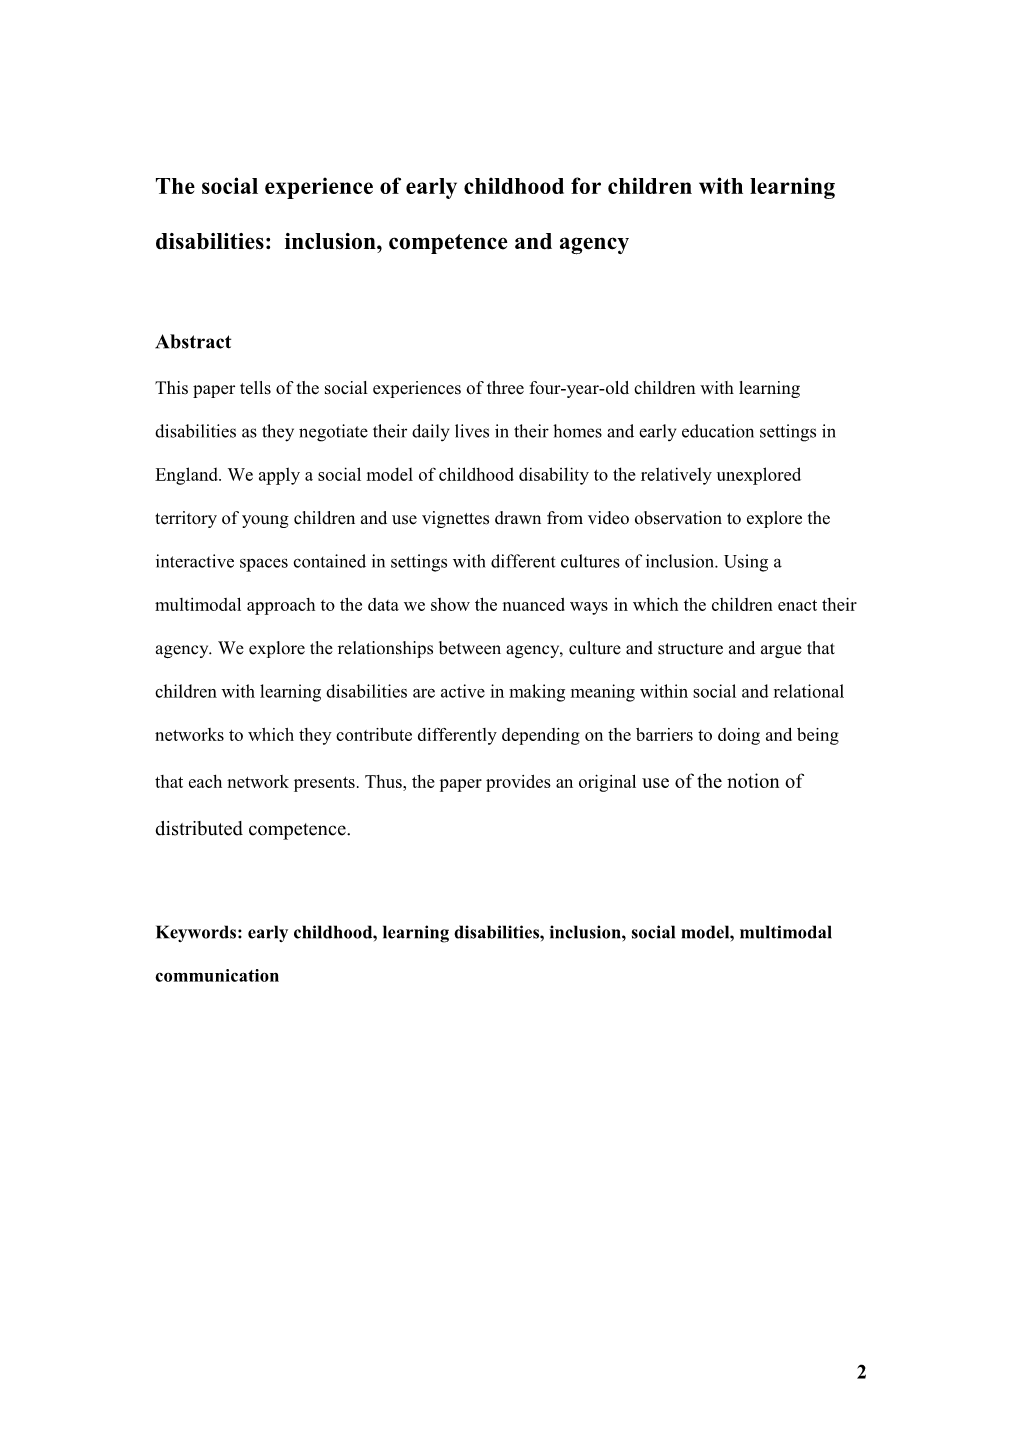 The Experiences of Young Children with Learning Disabilities Attending Both Special And